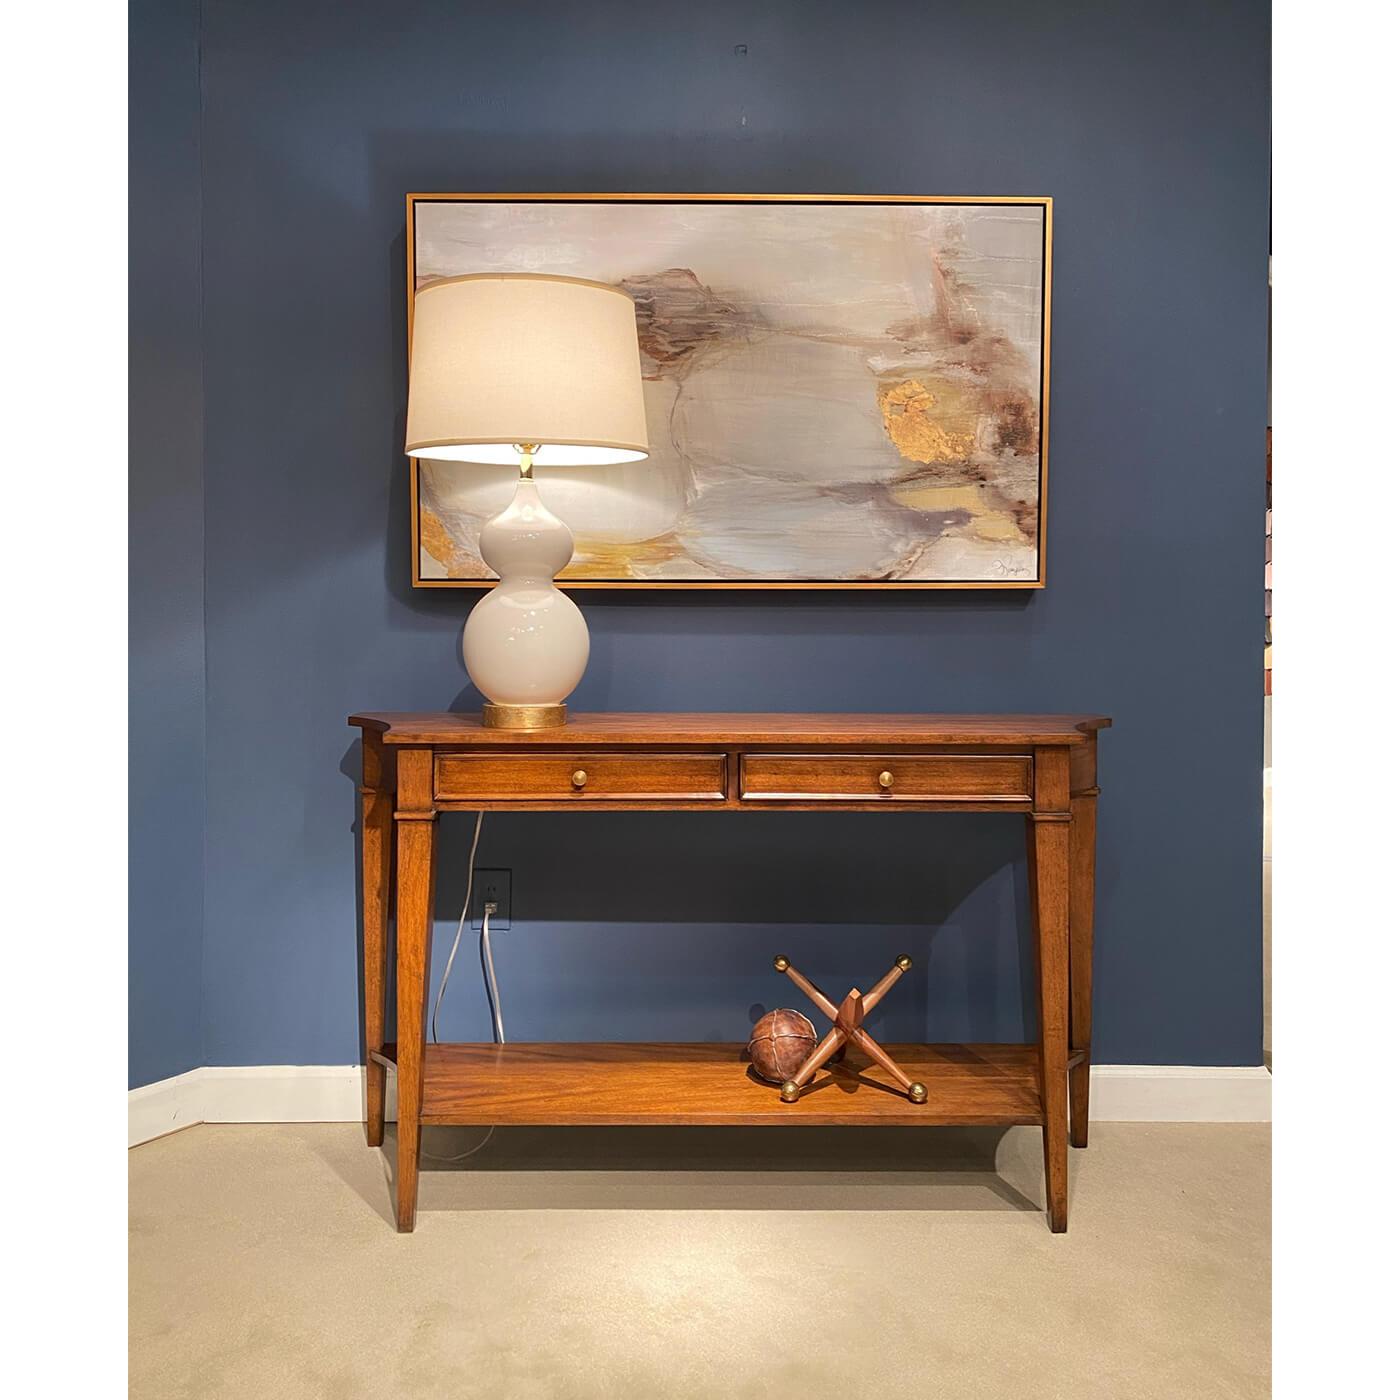 Neoclassical Classic Rustic Console Table, Walnut Finish For Sale